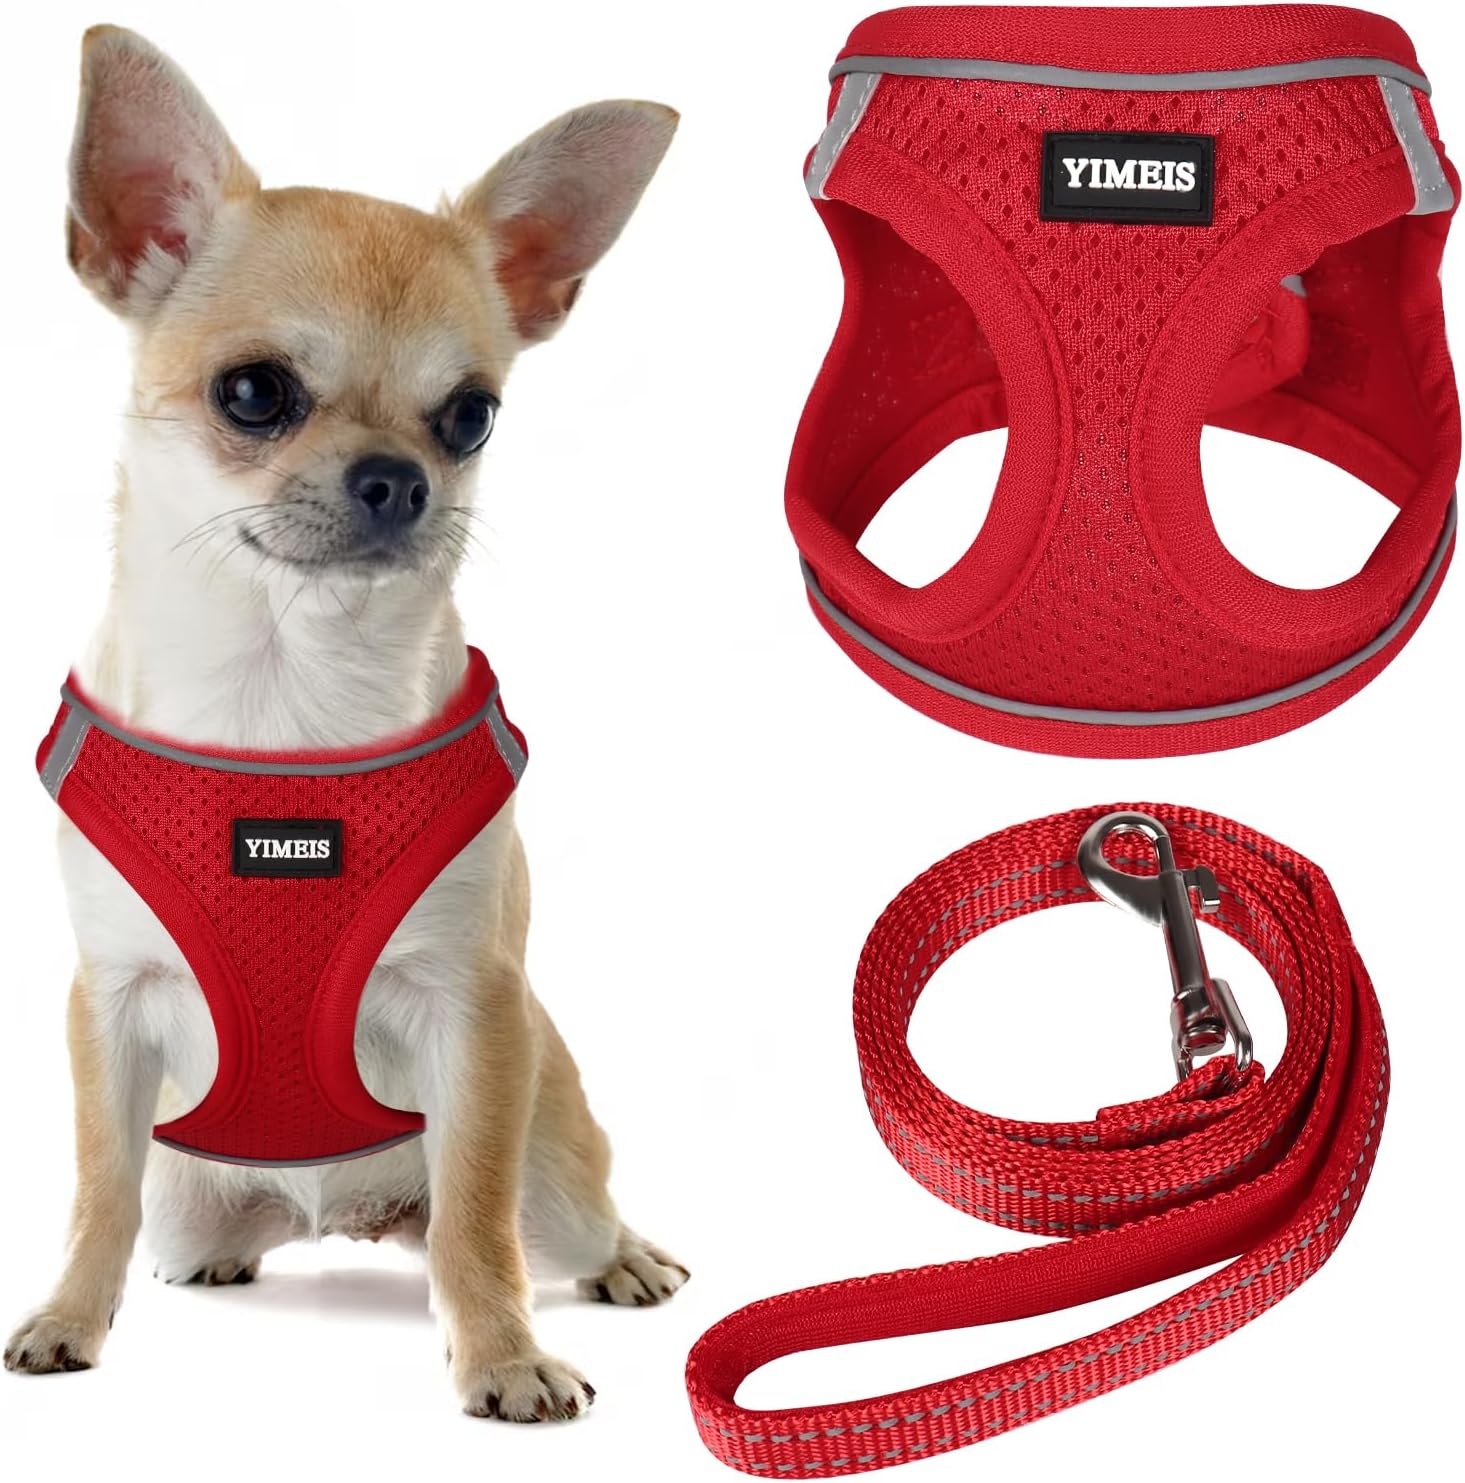 YIMEIS Dog Harness and Leash Set, No Pull Soft Mesh Pet Harness, Reflective Adjustable Puppy Vest for Small Medium Large Dogs, Cats (Red 02, Small (Pack of 1)